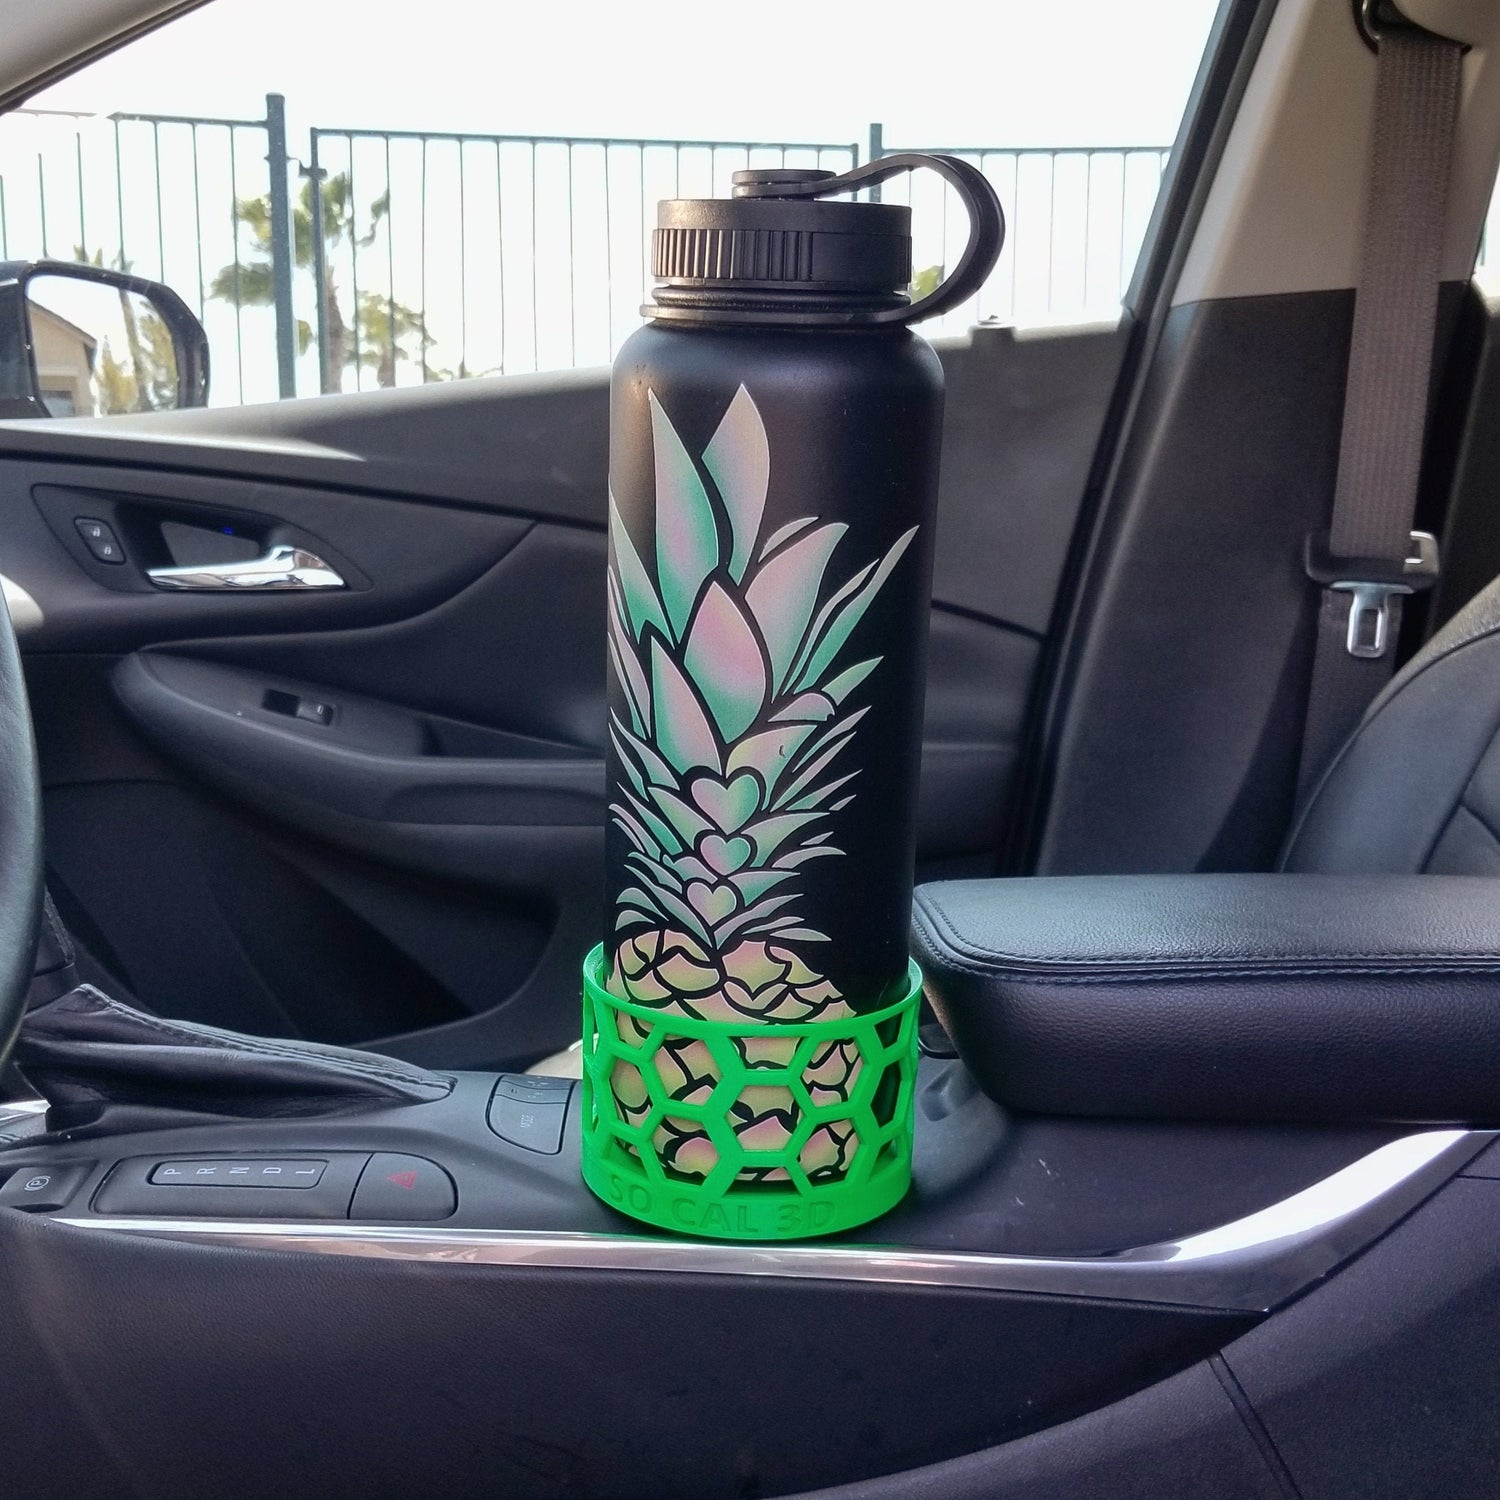 Cup Holder Adapter - 3D Printed - Works with 32oz & 40oz